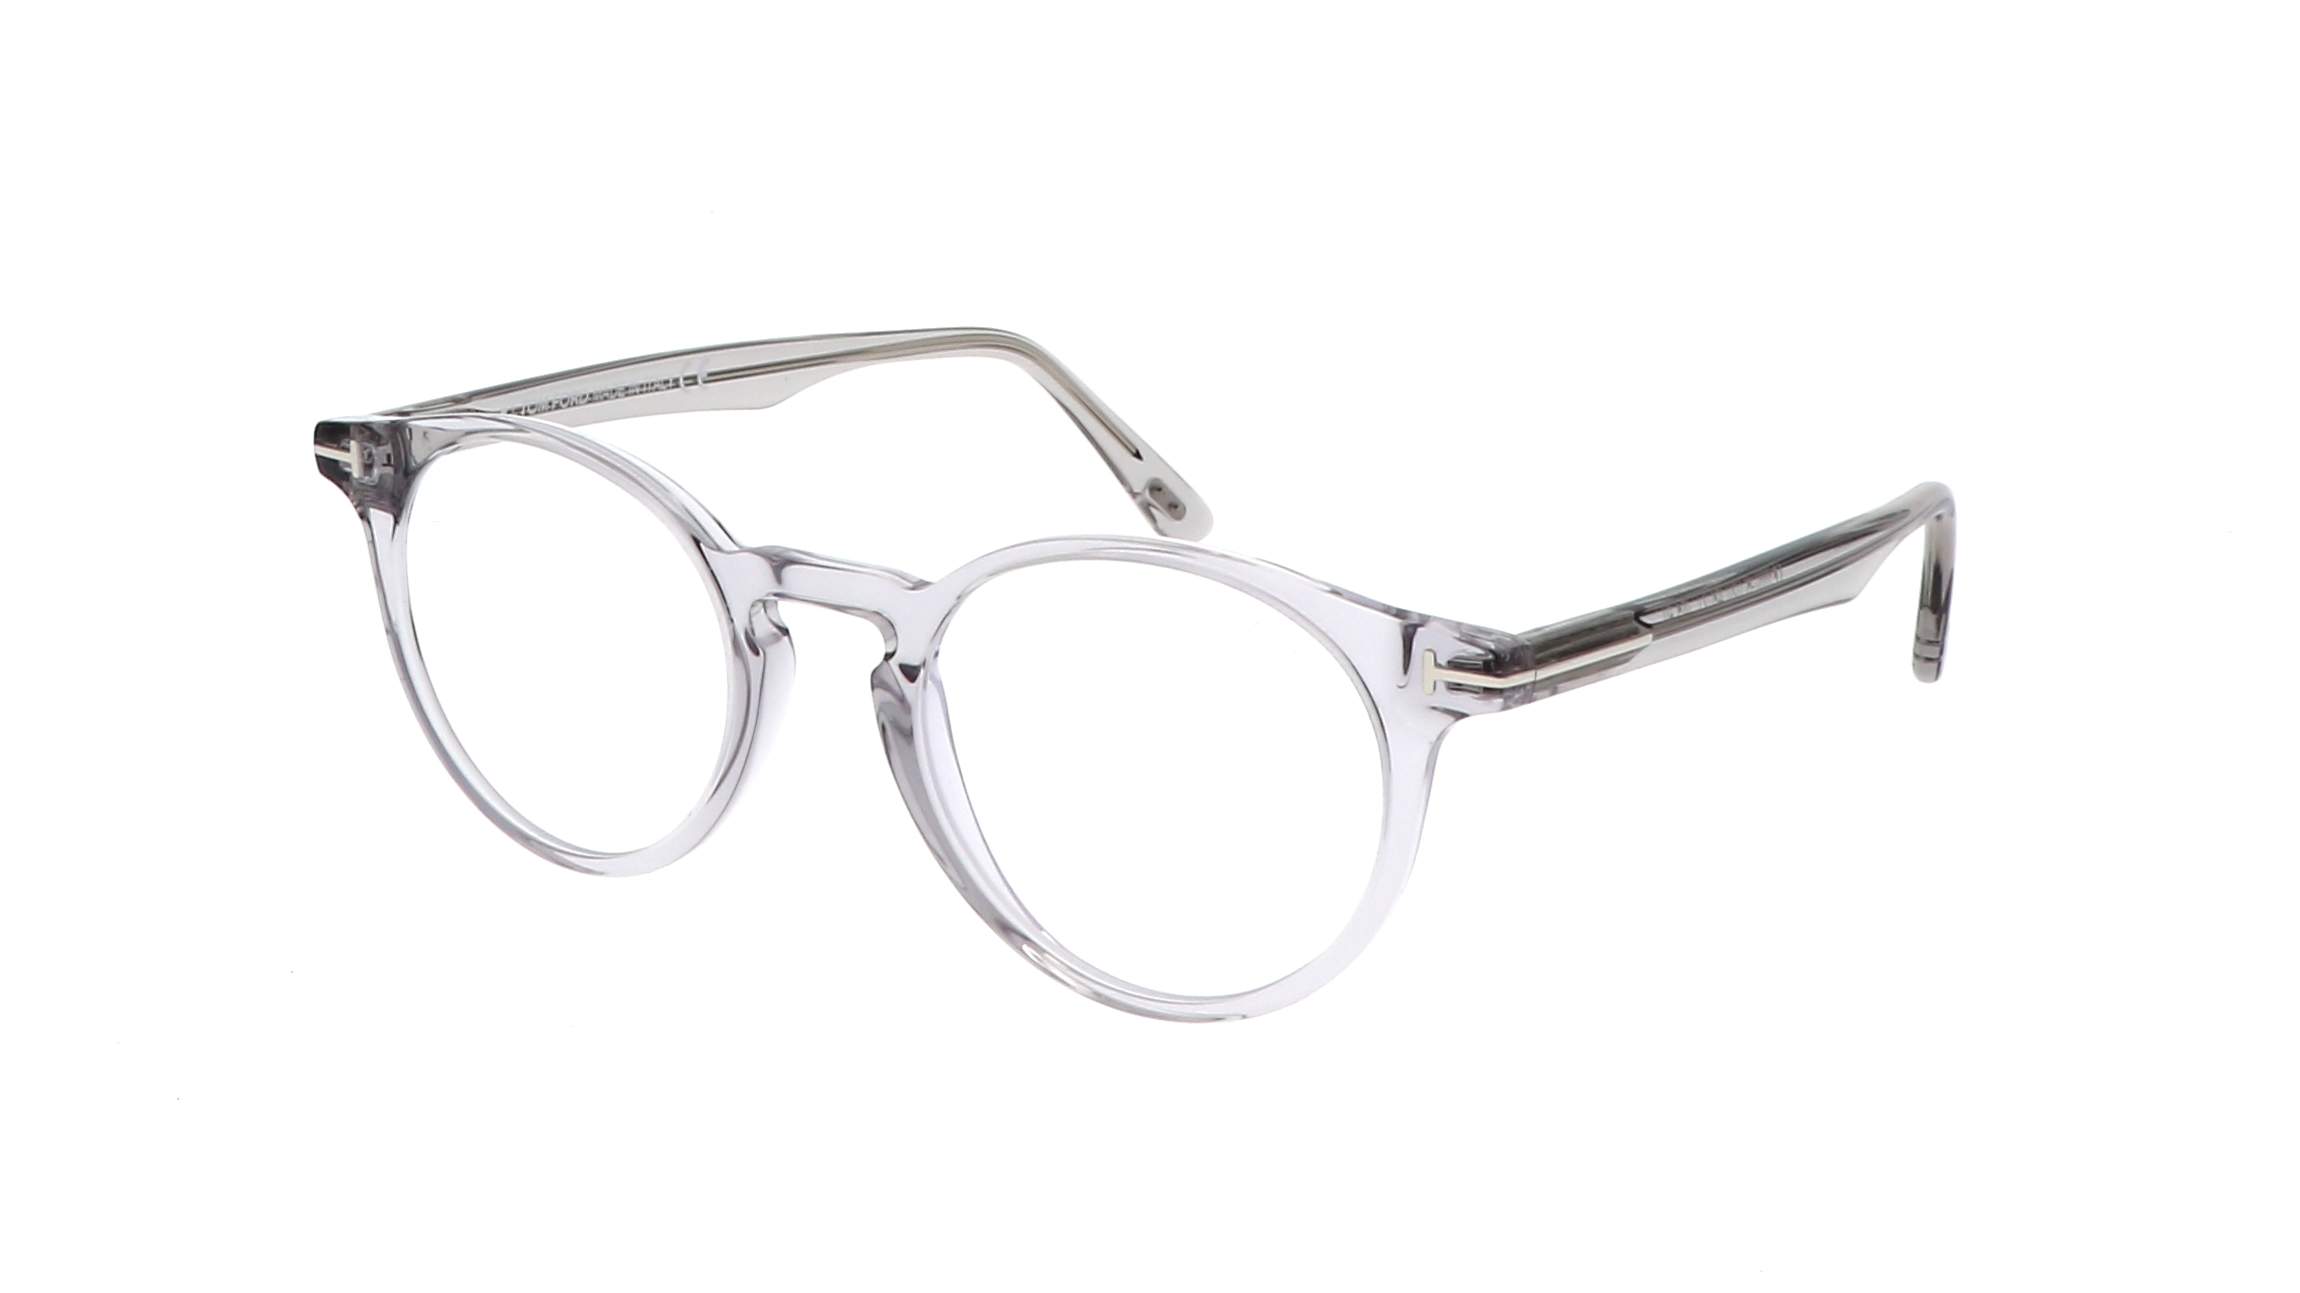 Eyeglasses Tom Ford FT5557-B/V 020 48-21 Clear Small in stock | Price ...